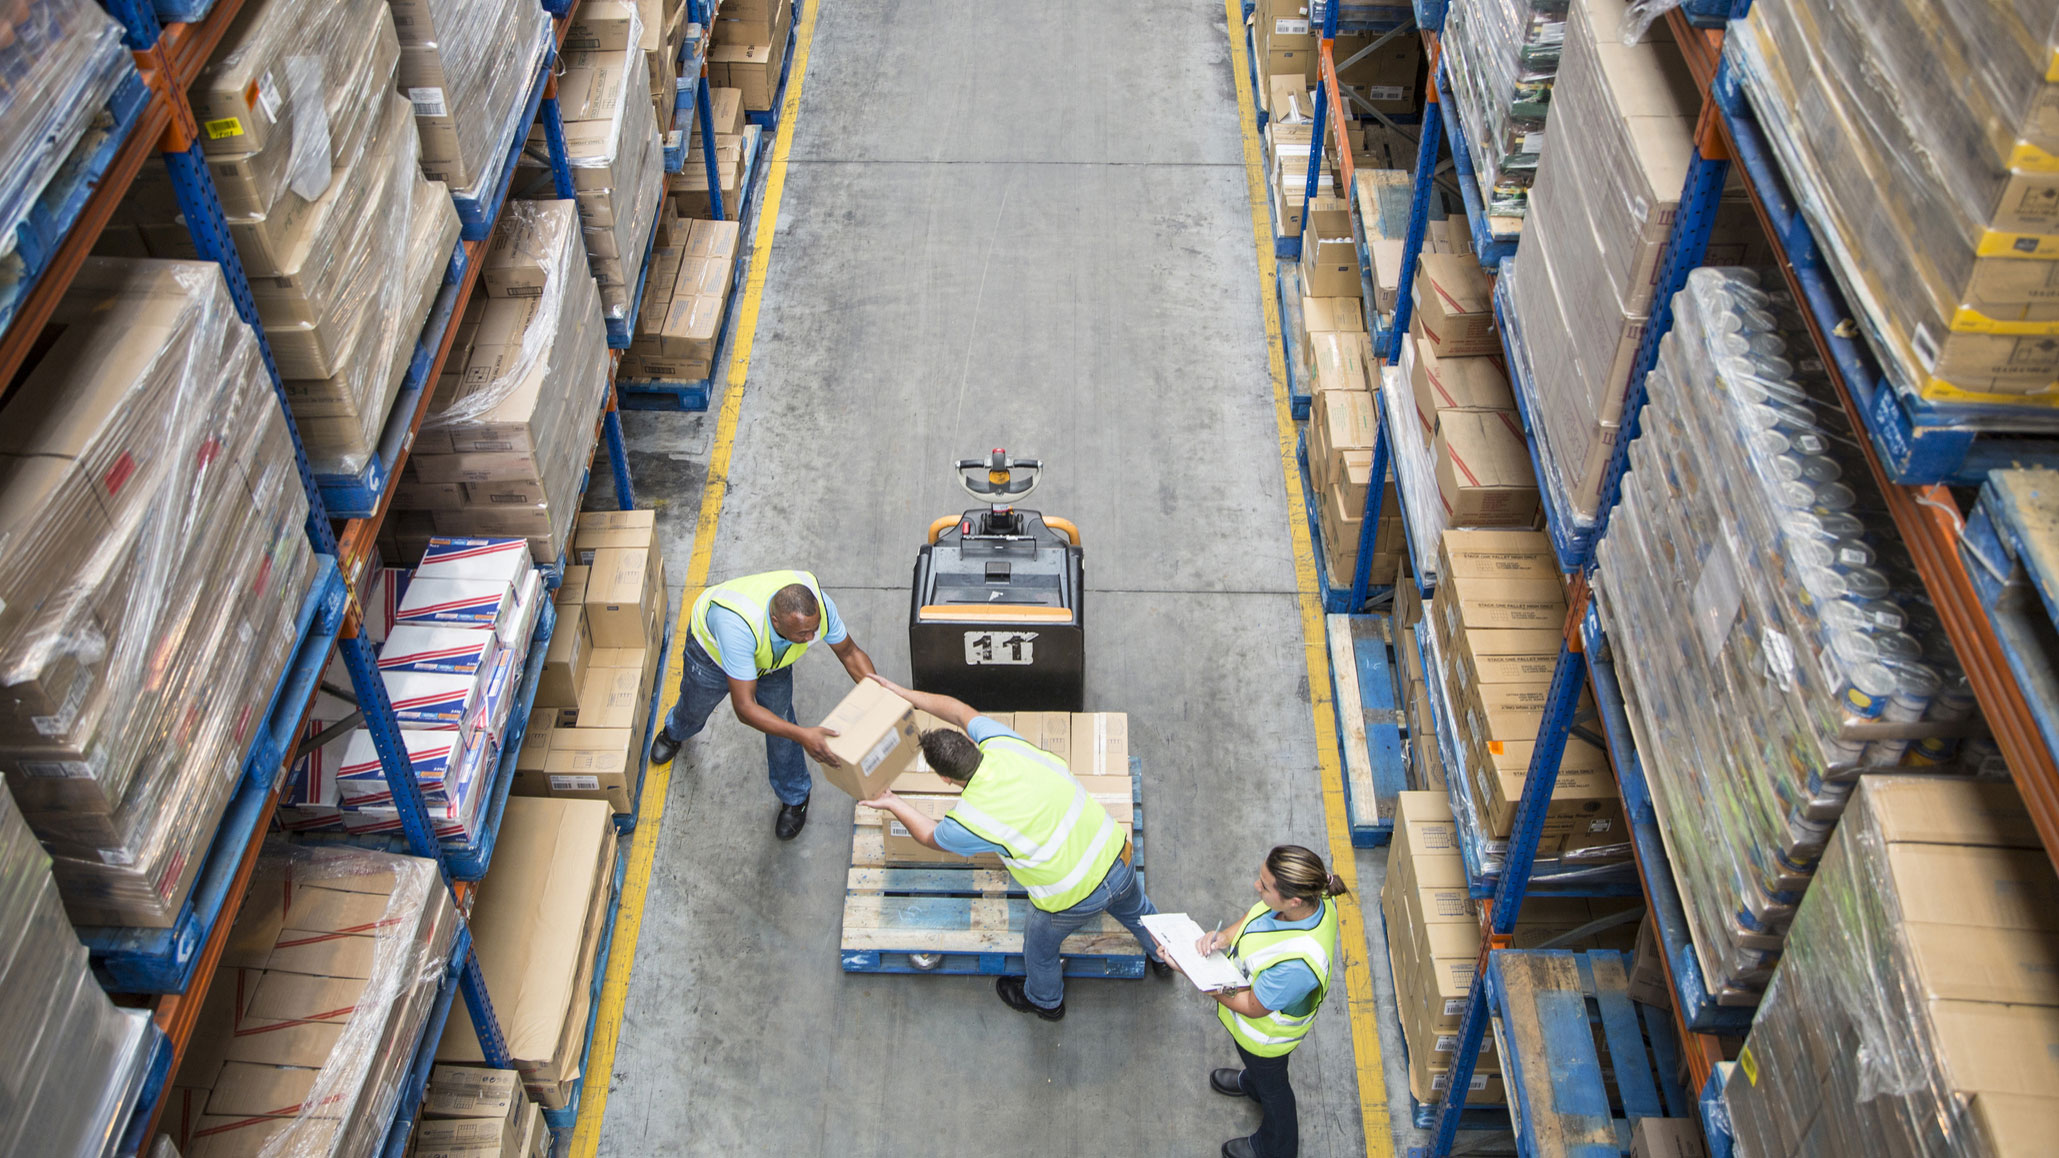 People filling a fork lift in a warehouse